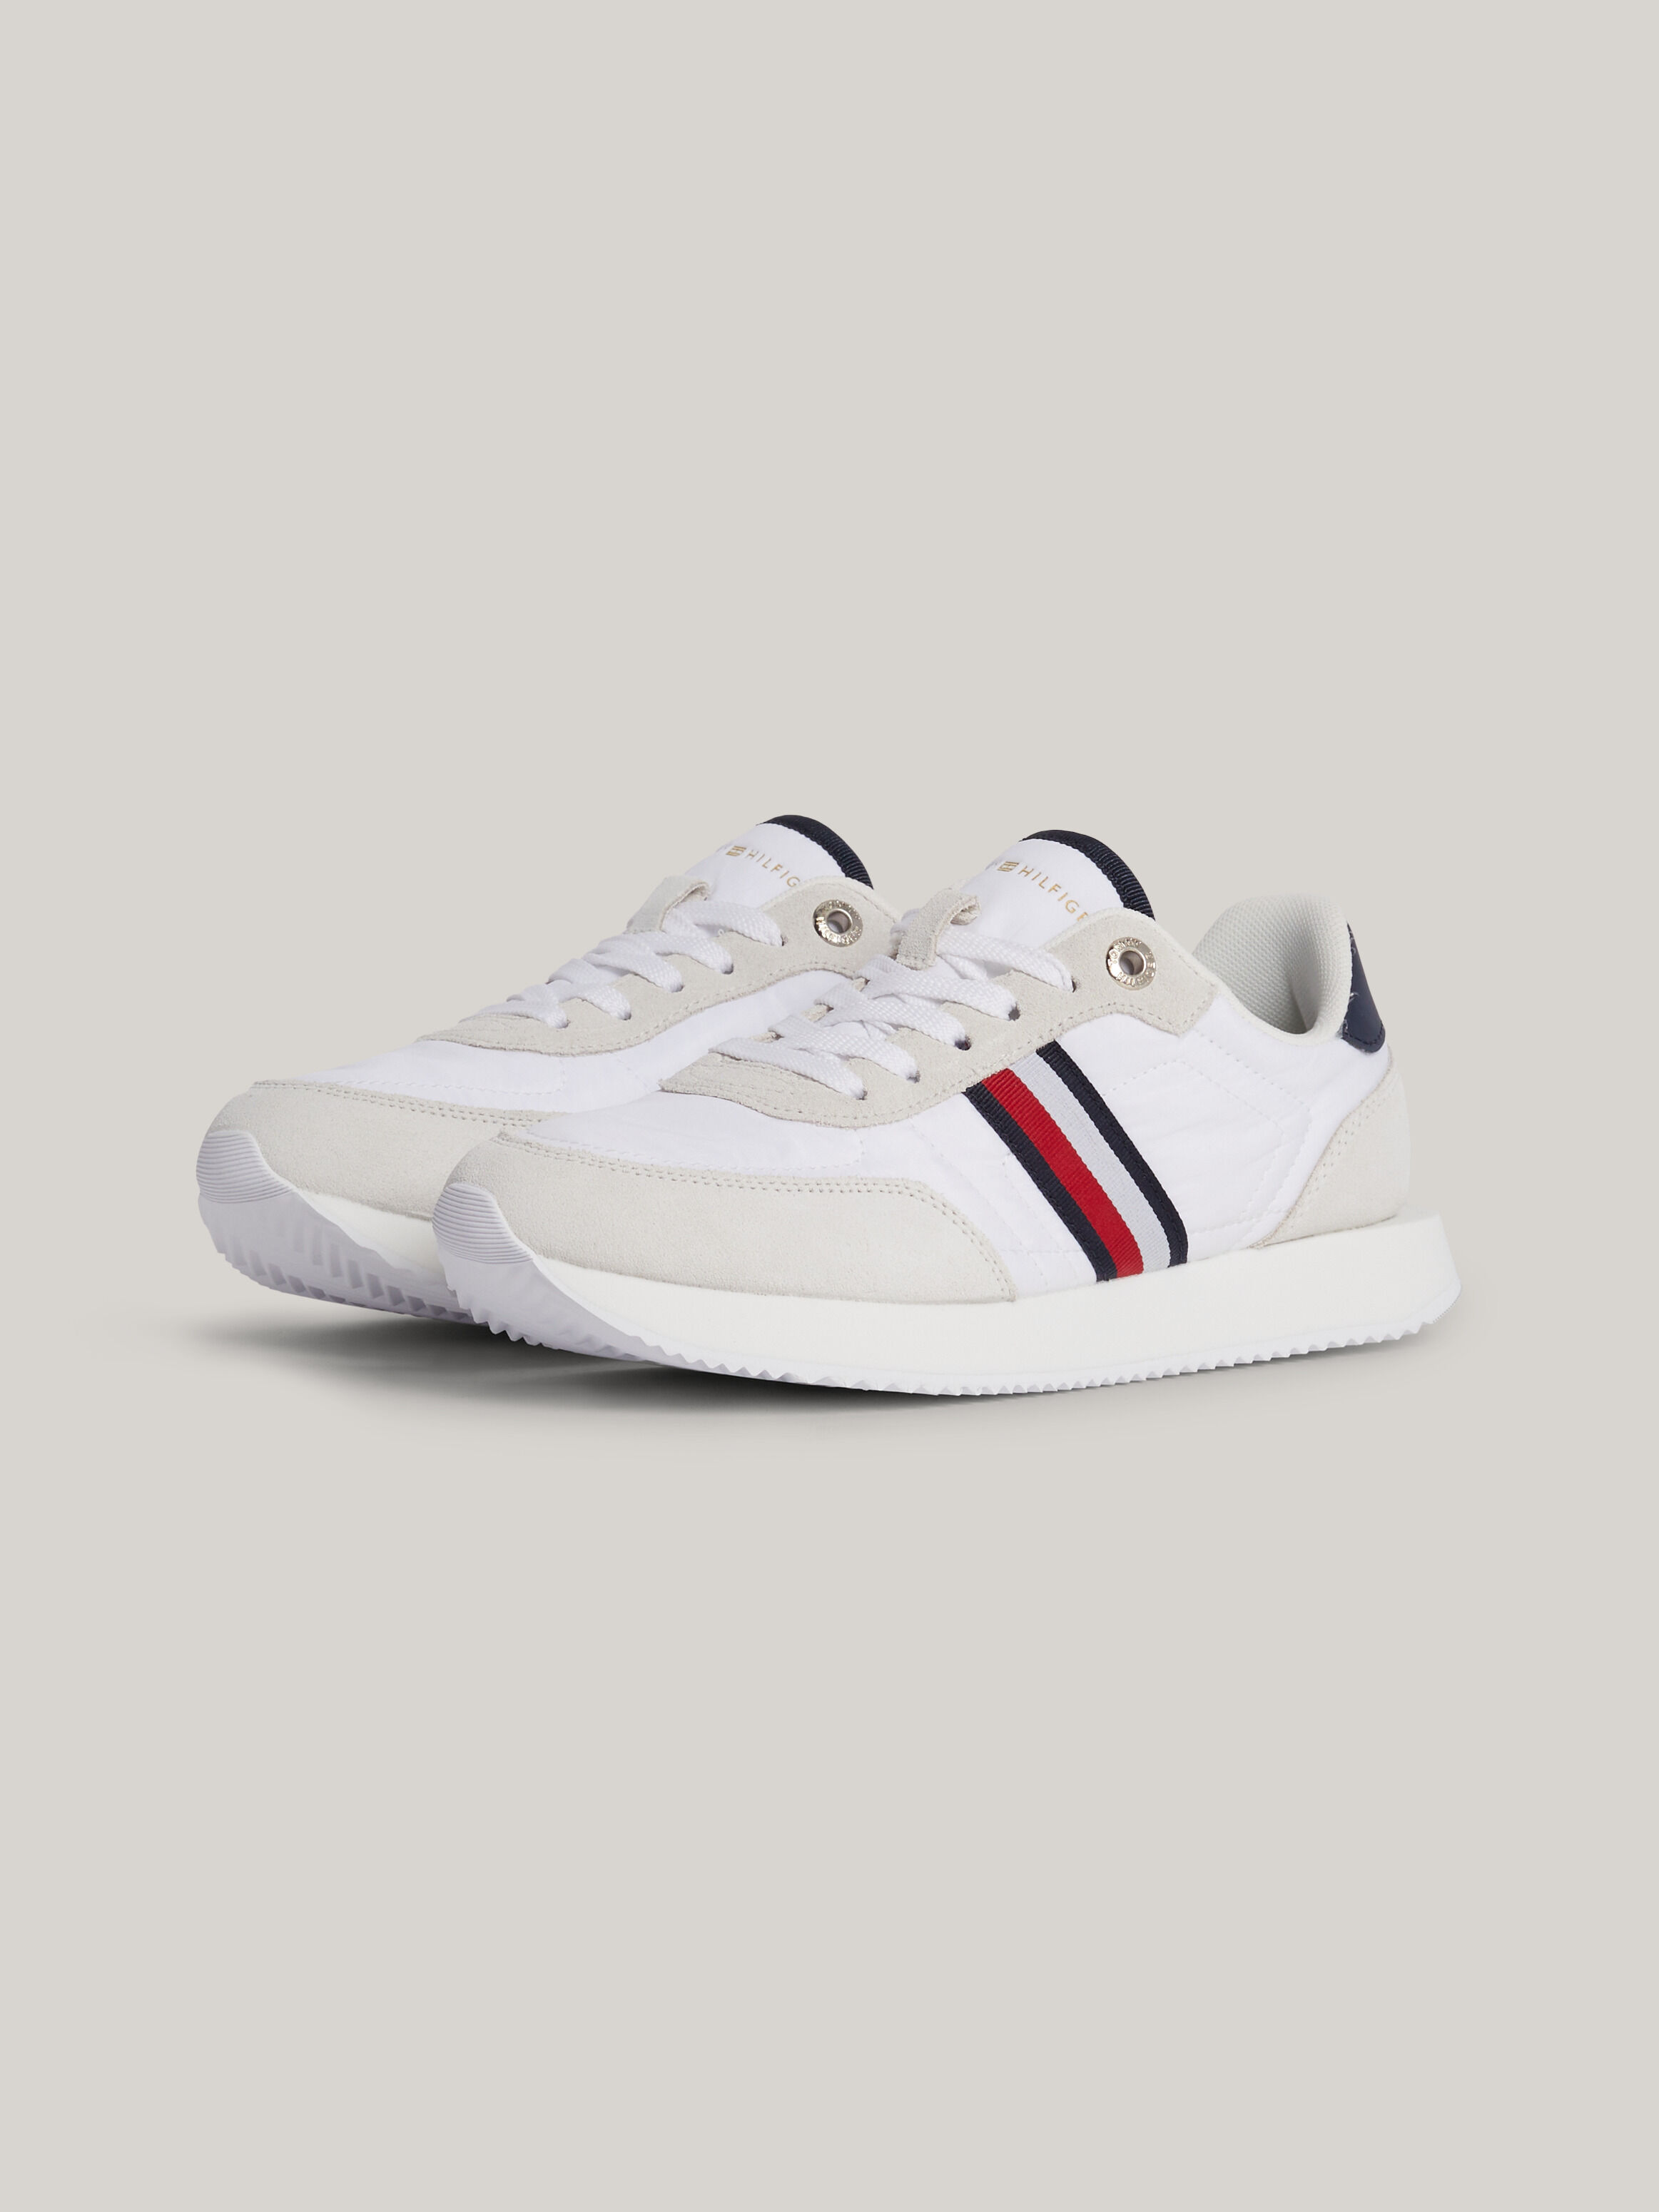 Women's Trainers | Tommy Hilfiger Singapore